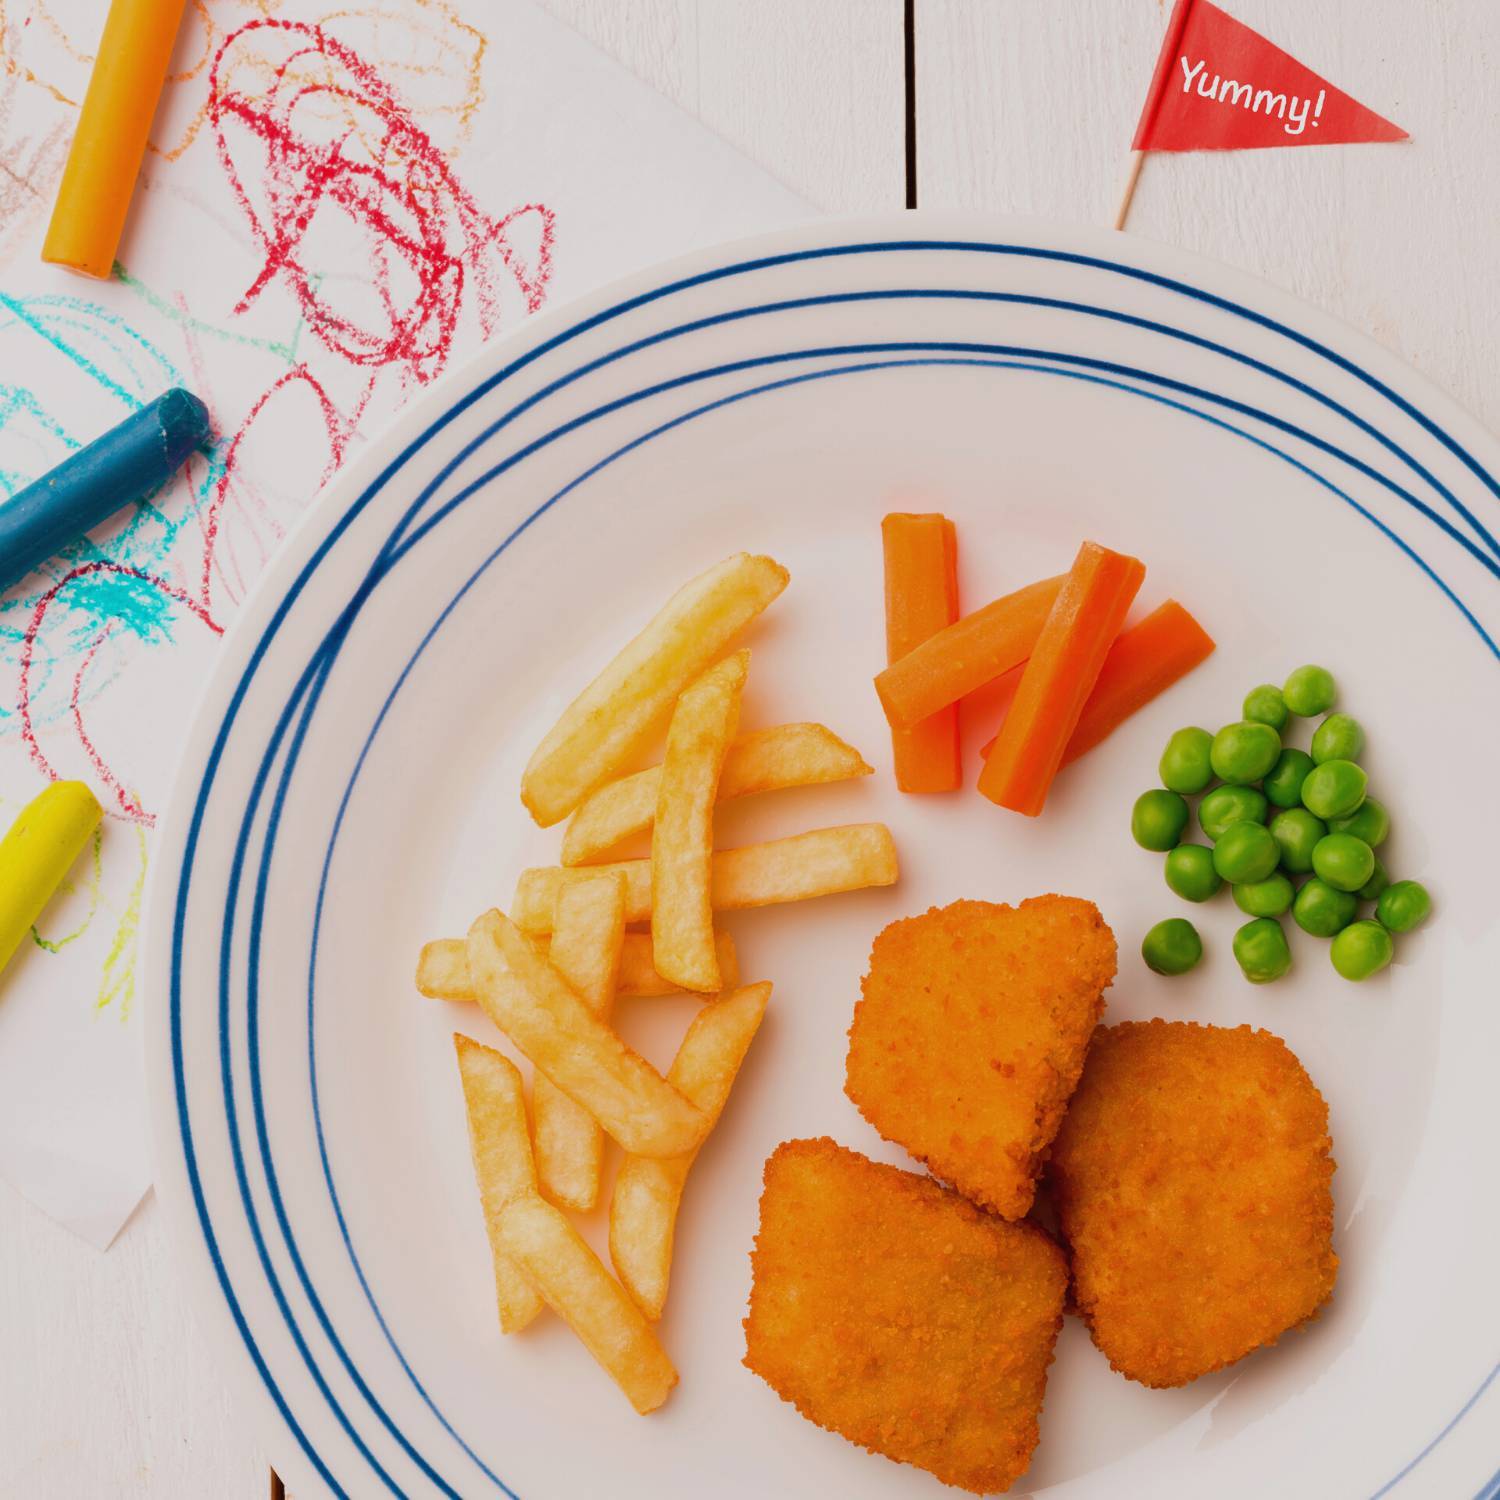 Image for Kid's Meals category